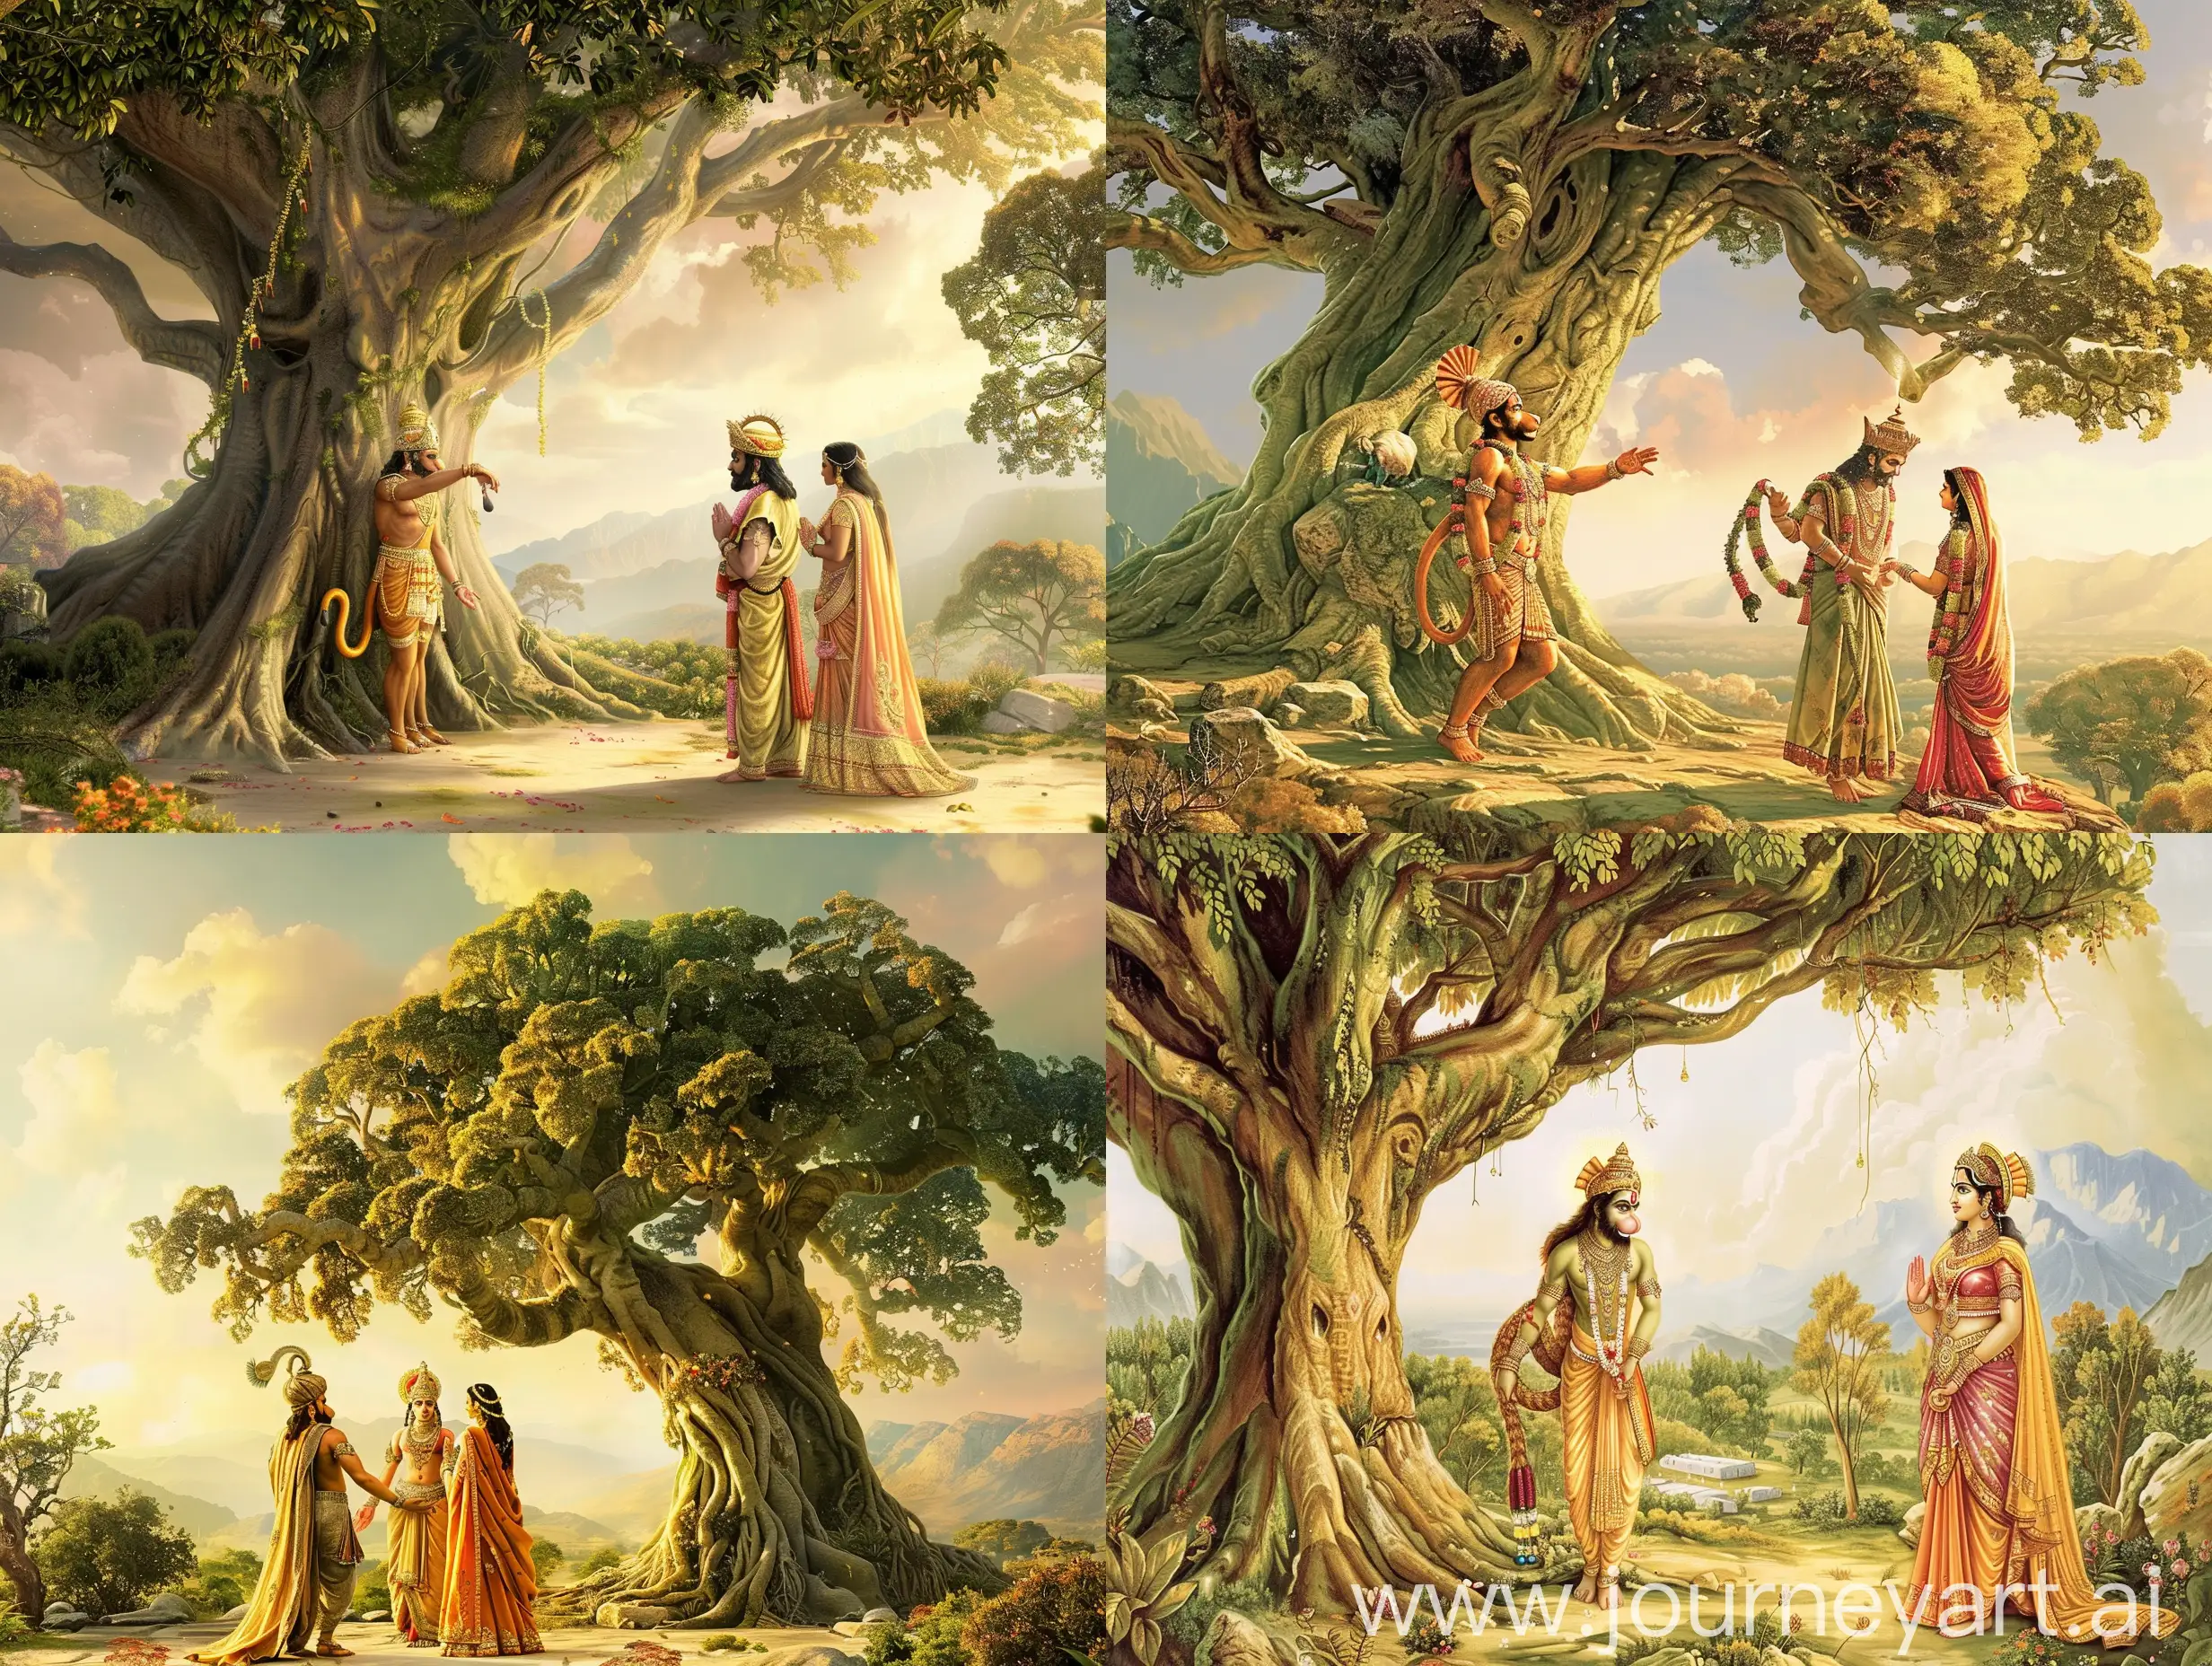 Create a high-definition, serene and divine image featuring Lord Hanuman, Shri Ram, and Mata Sita. The setting should include a majestic, ancient tree similar to a Banyan tree, under which the deities are depicted. Lord Hanuman is shown bowing reverently to Mata Sita, who stands gracefully beside Shri Ram. The background includes a peaceful landscape with mountains, trees, and a clear sky filled with soft, fluffy clouds. The overall atmosphere should be spiritual, vibrant, and detailed, capturing the essence of devotion and divinity